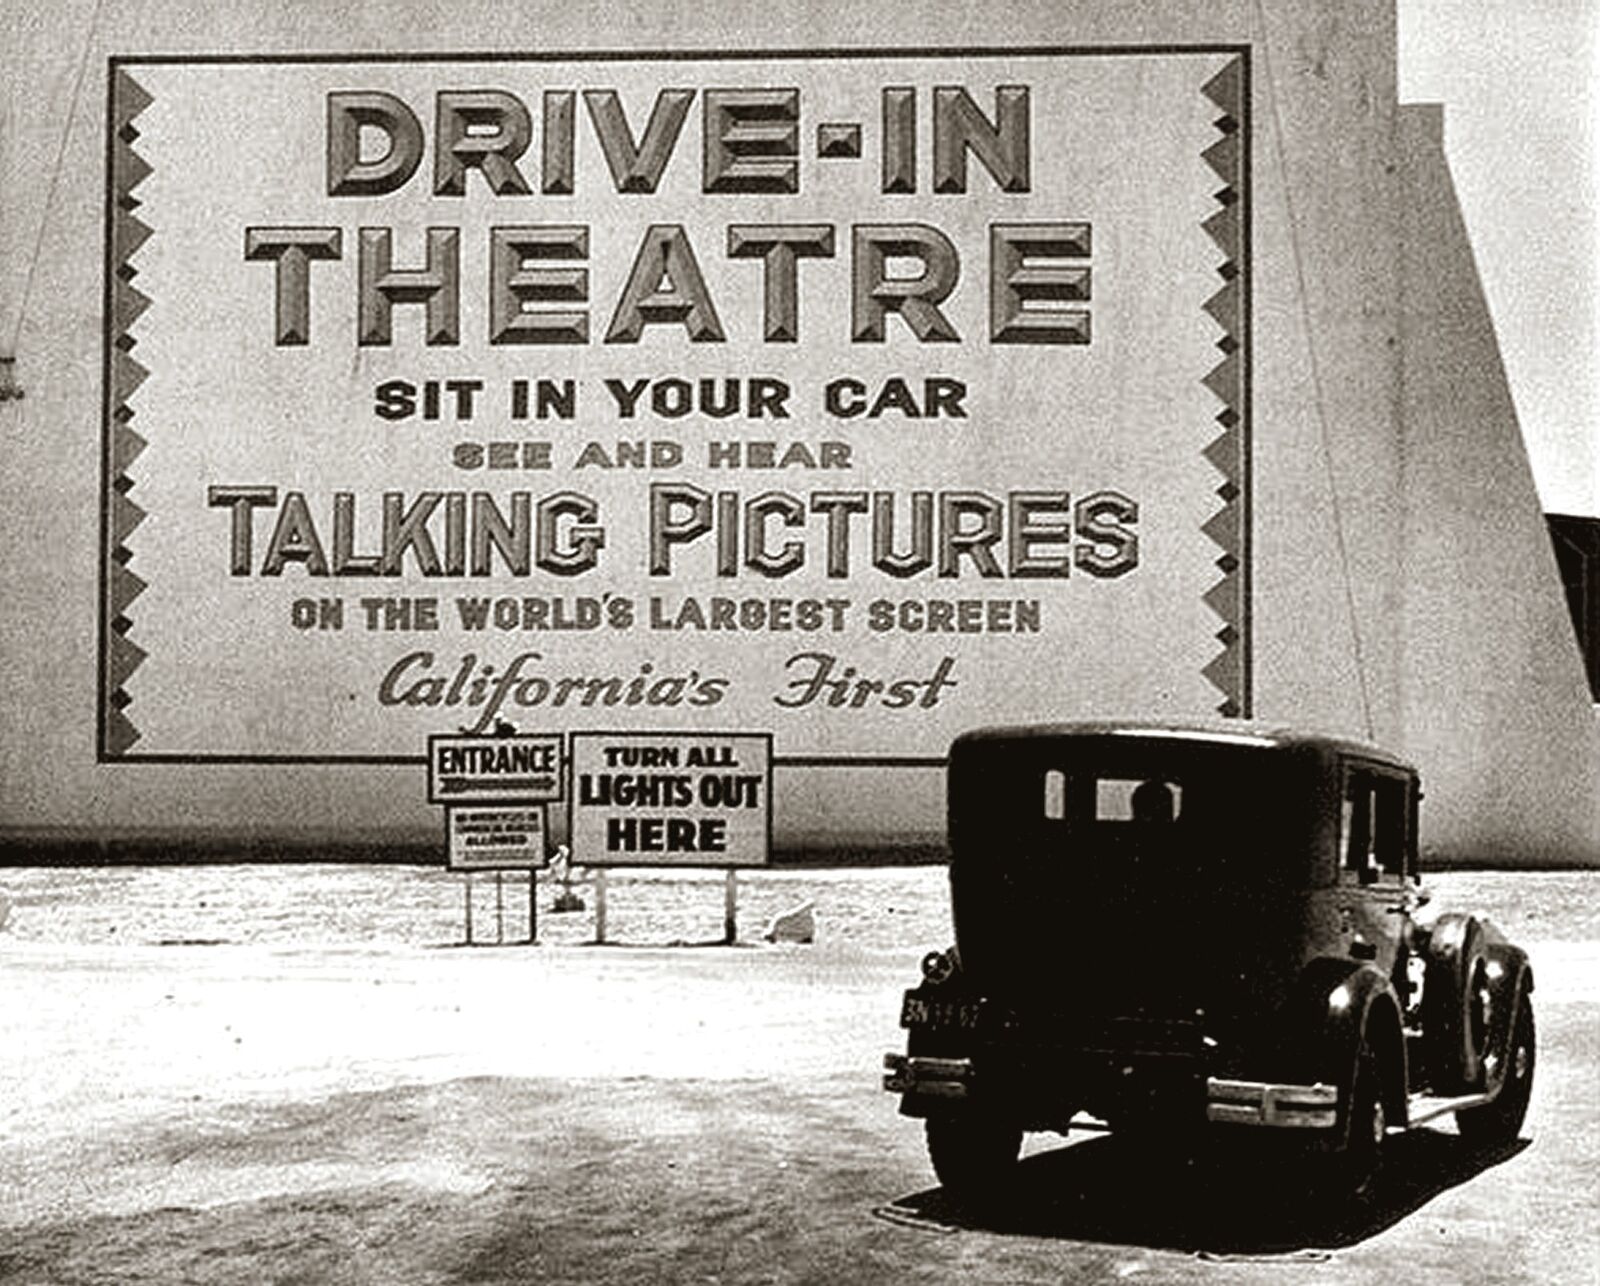 1935 LOS ANGELES DRIVE IN First in California PHOTO  (191-Z)